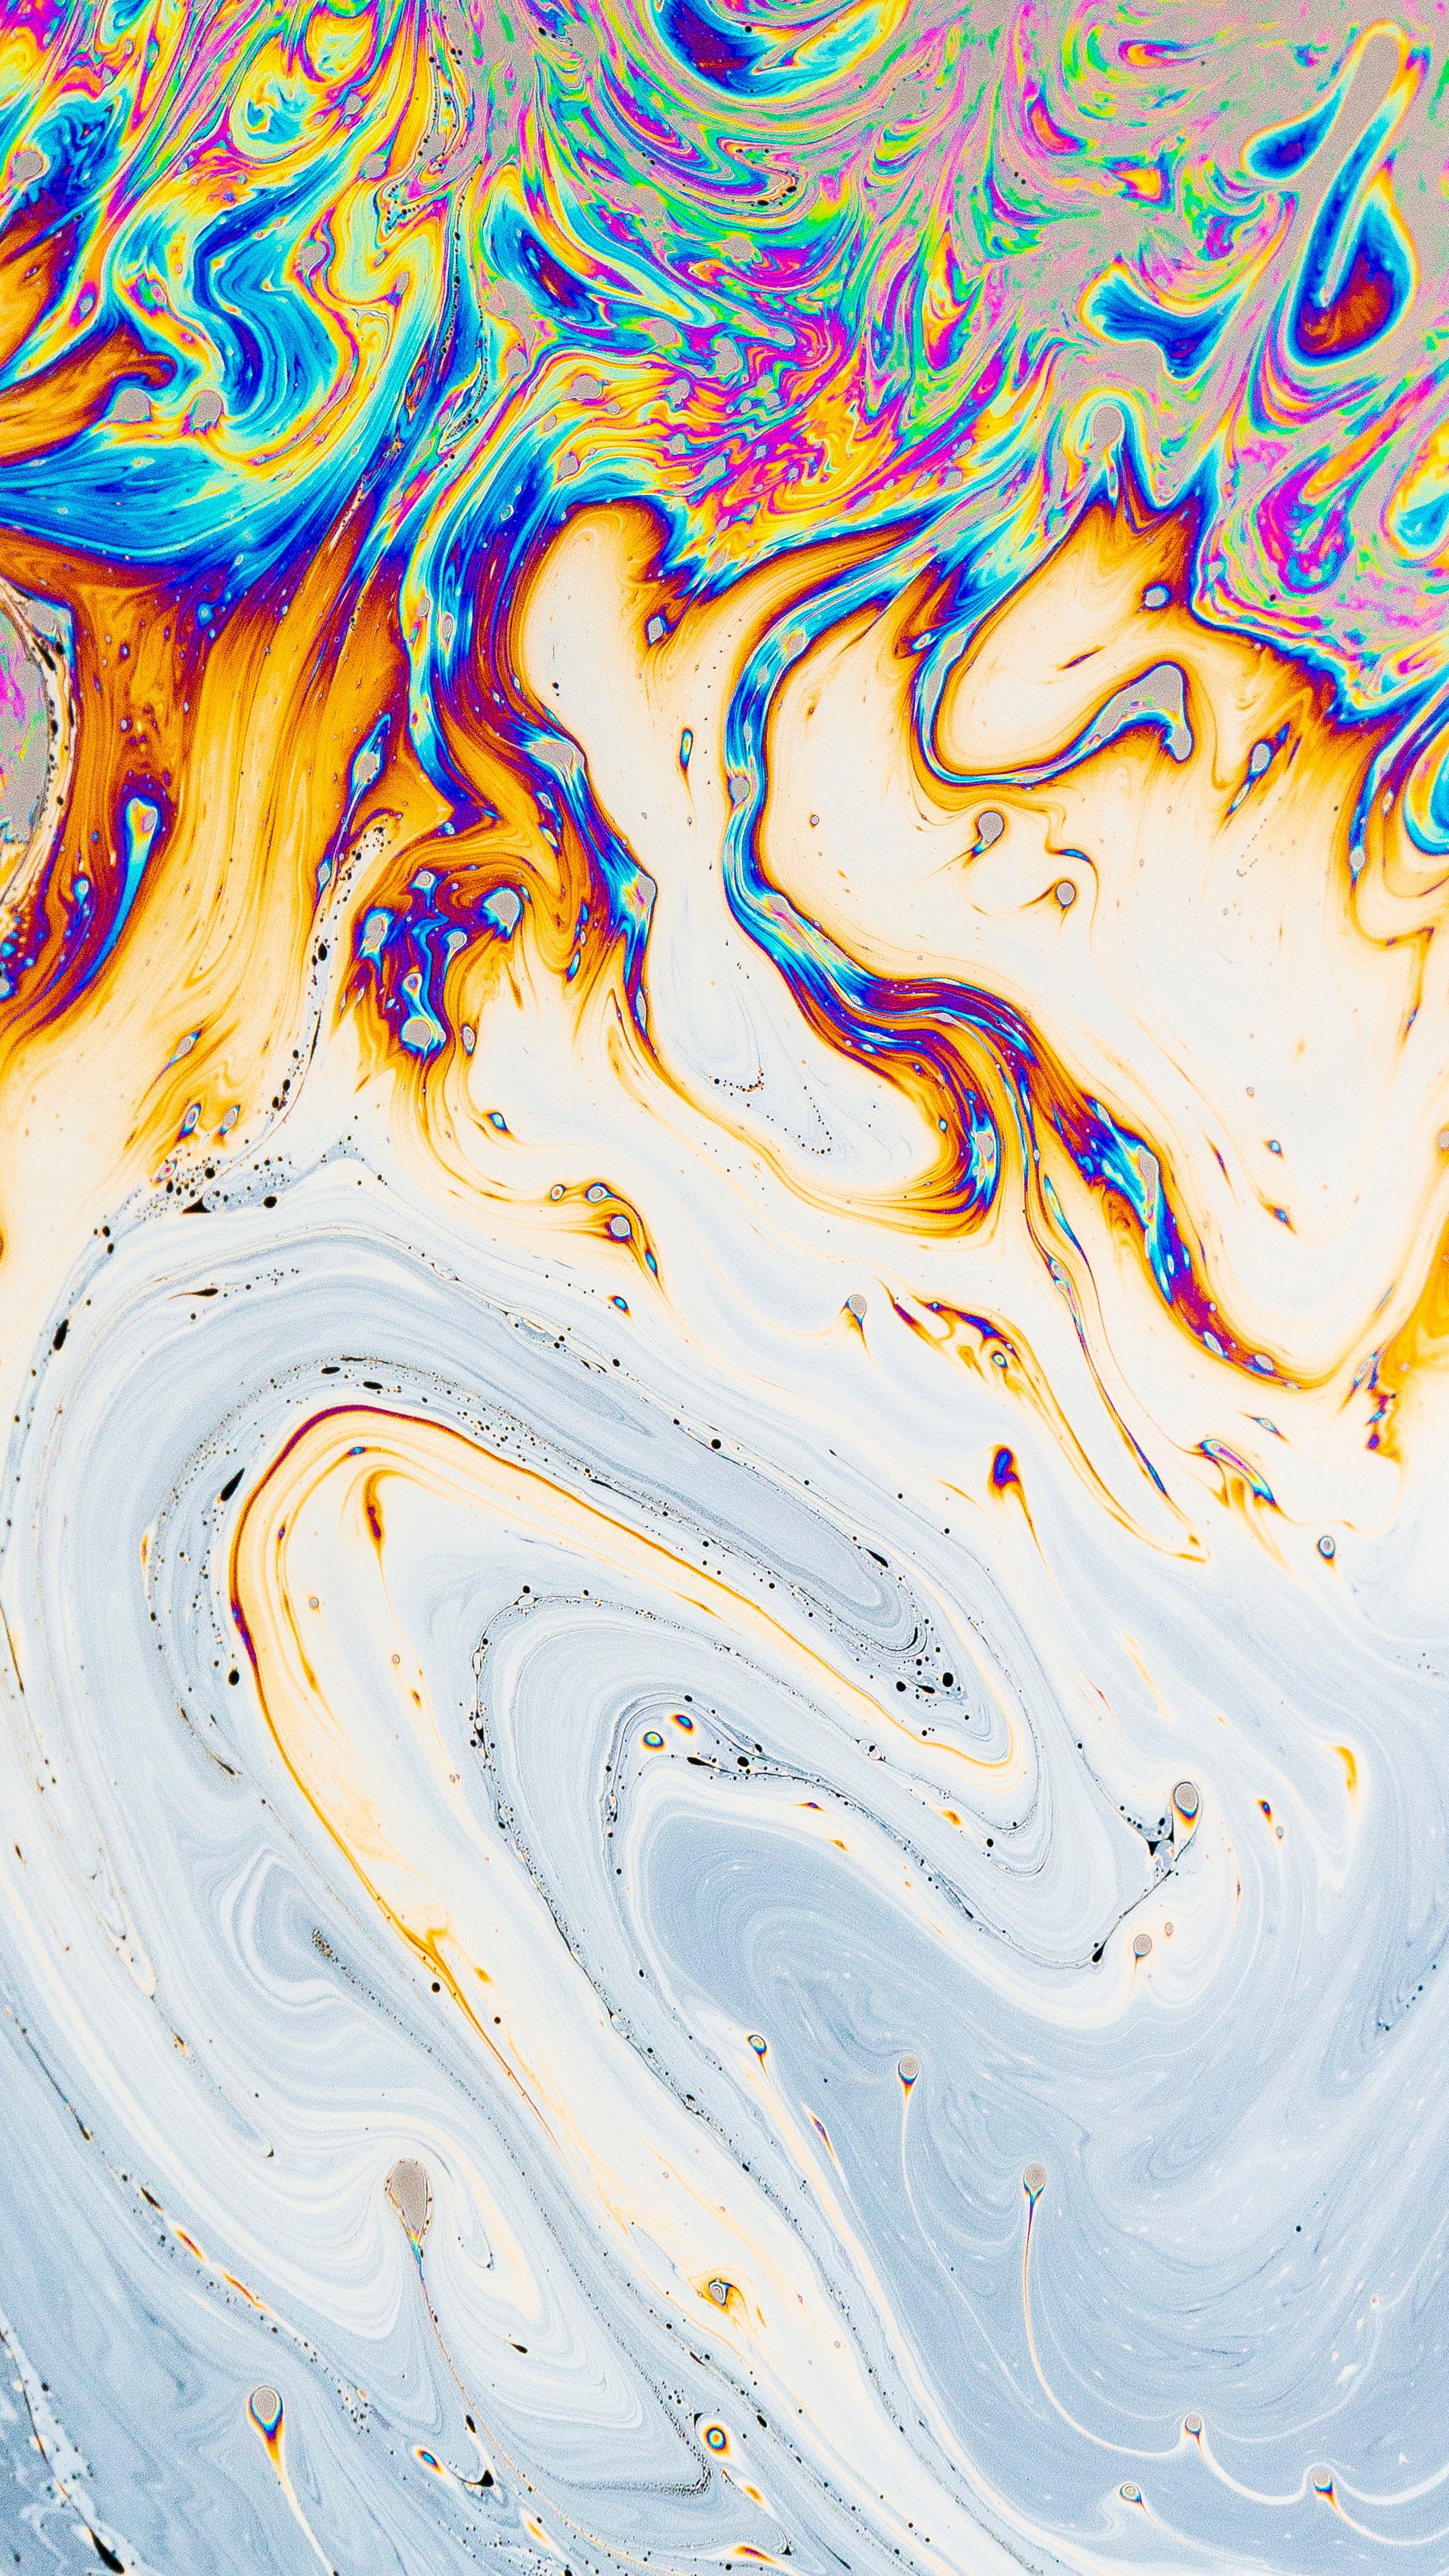 Soap and water mixing to form a multi-colored surface.